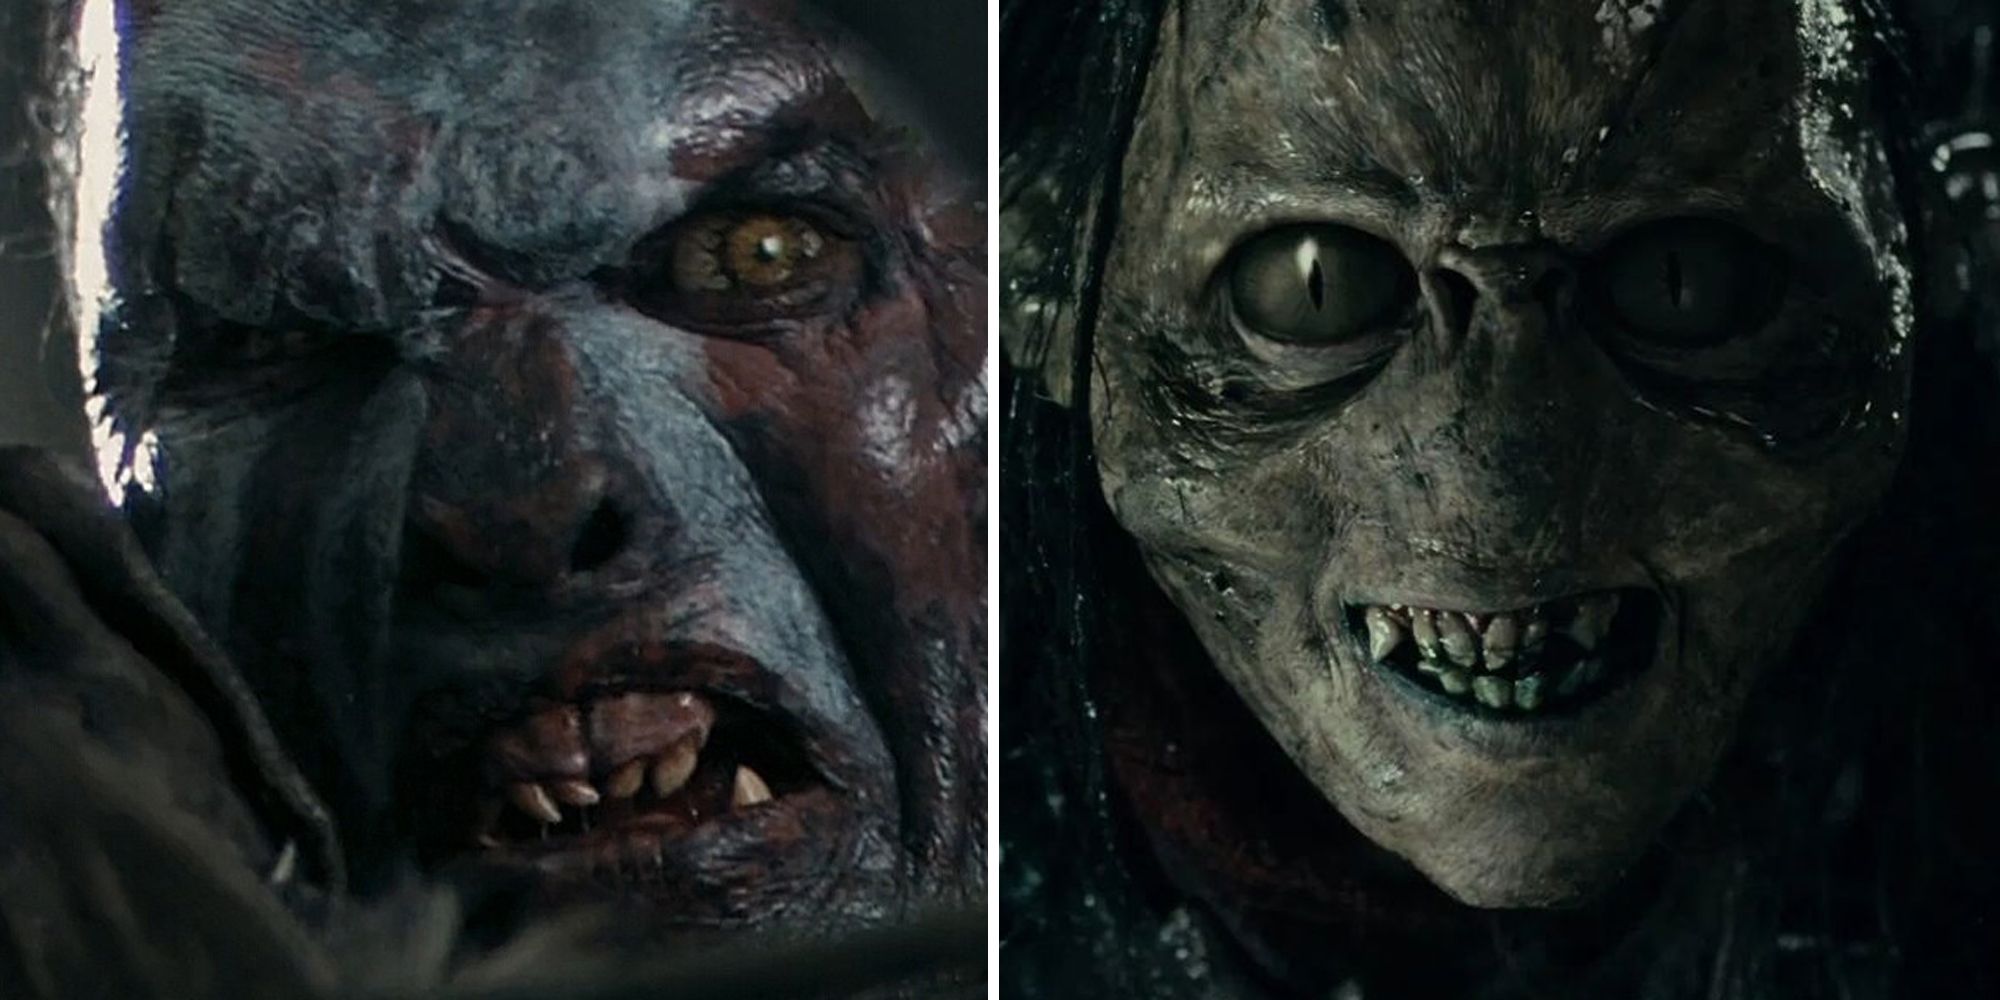 Split image of Lurtz the uruk-hai and a Moria orc from Lord of the Rings